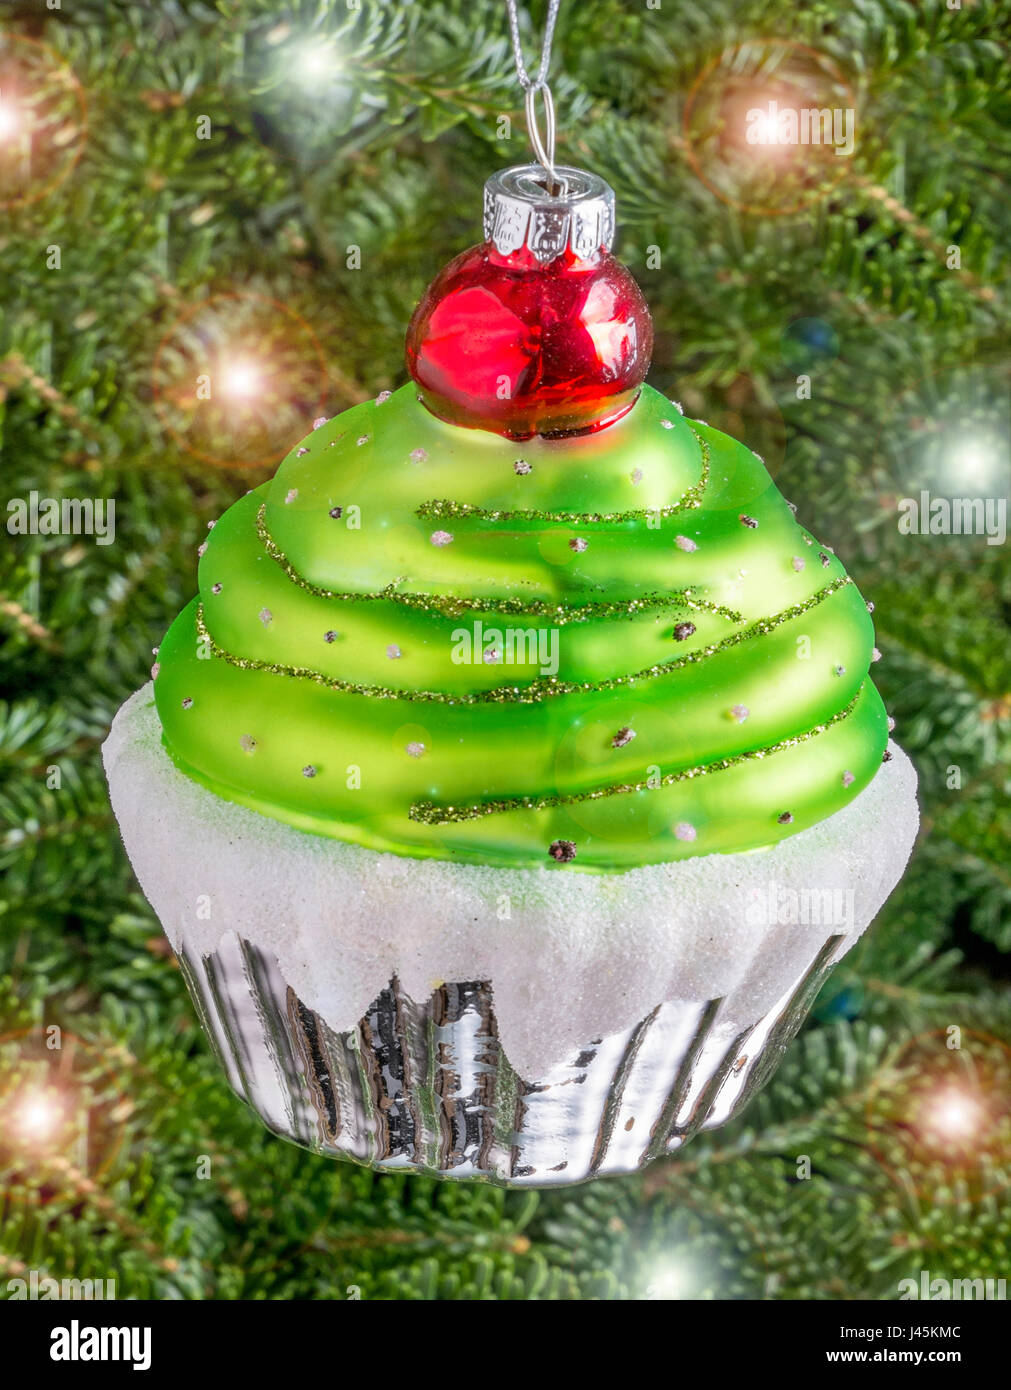 Christmas bauble hanging from a tree in the shape of a Cup Cake Stock Photo